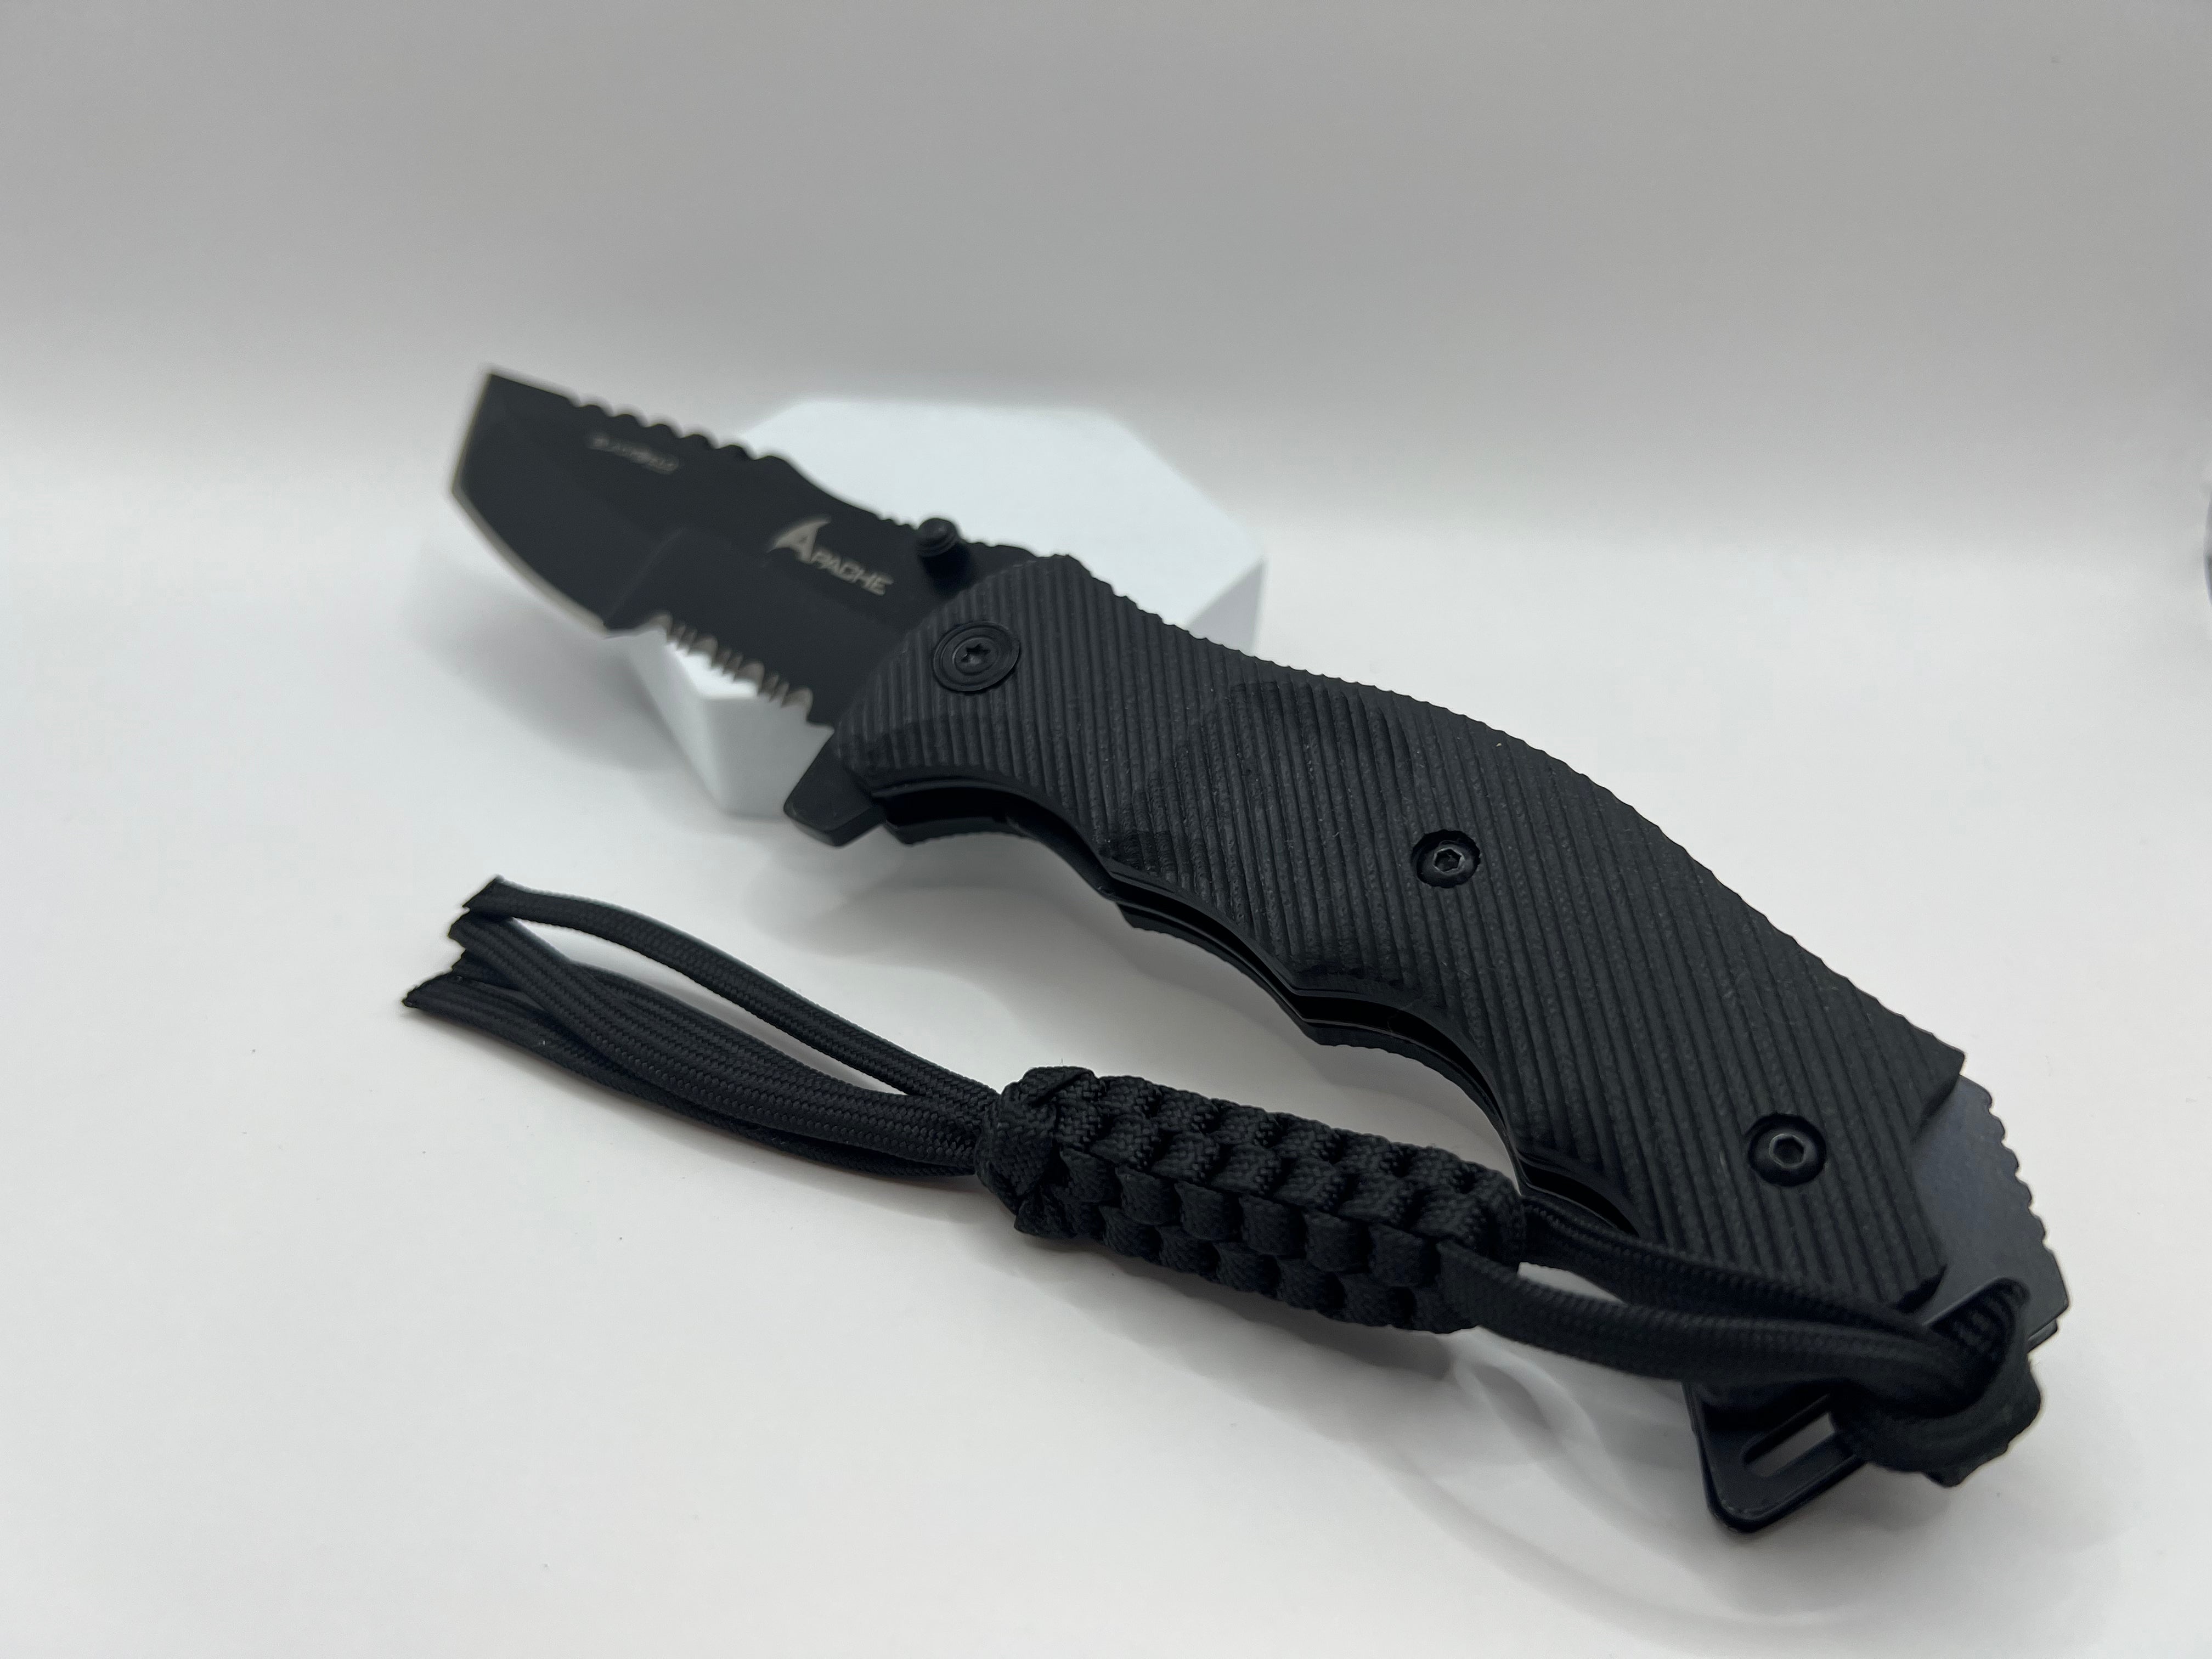 Black Field Apache Folder-The reliable insert pocket knife with spring-assisted blade opening